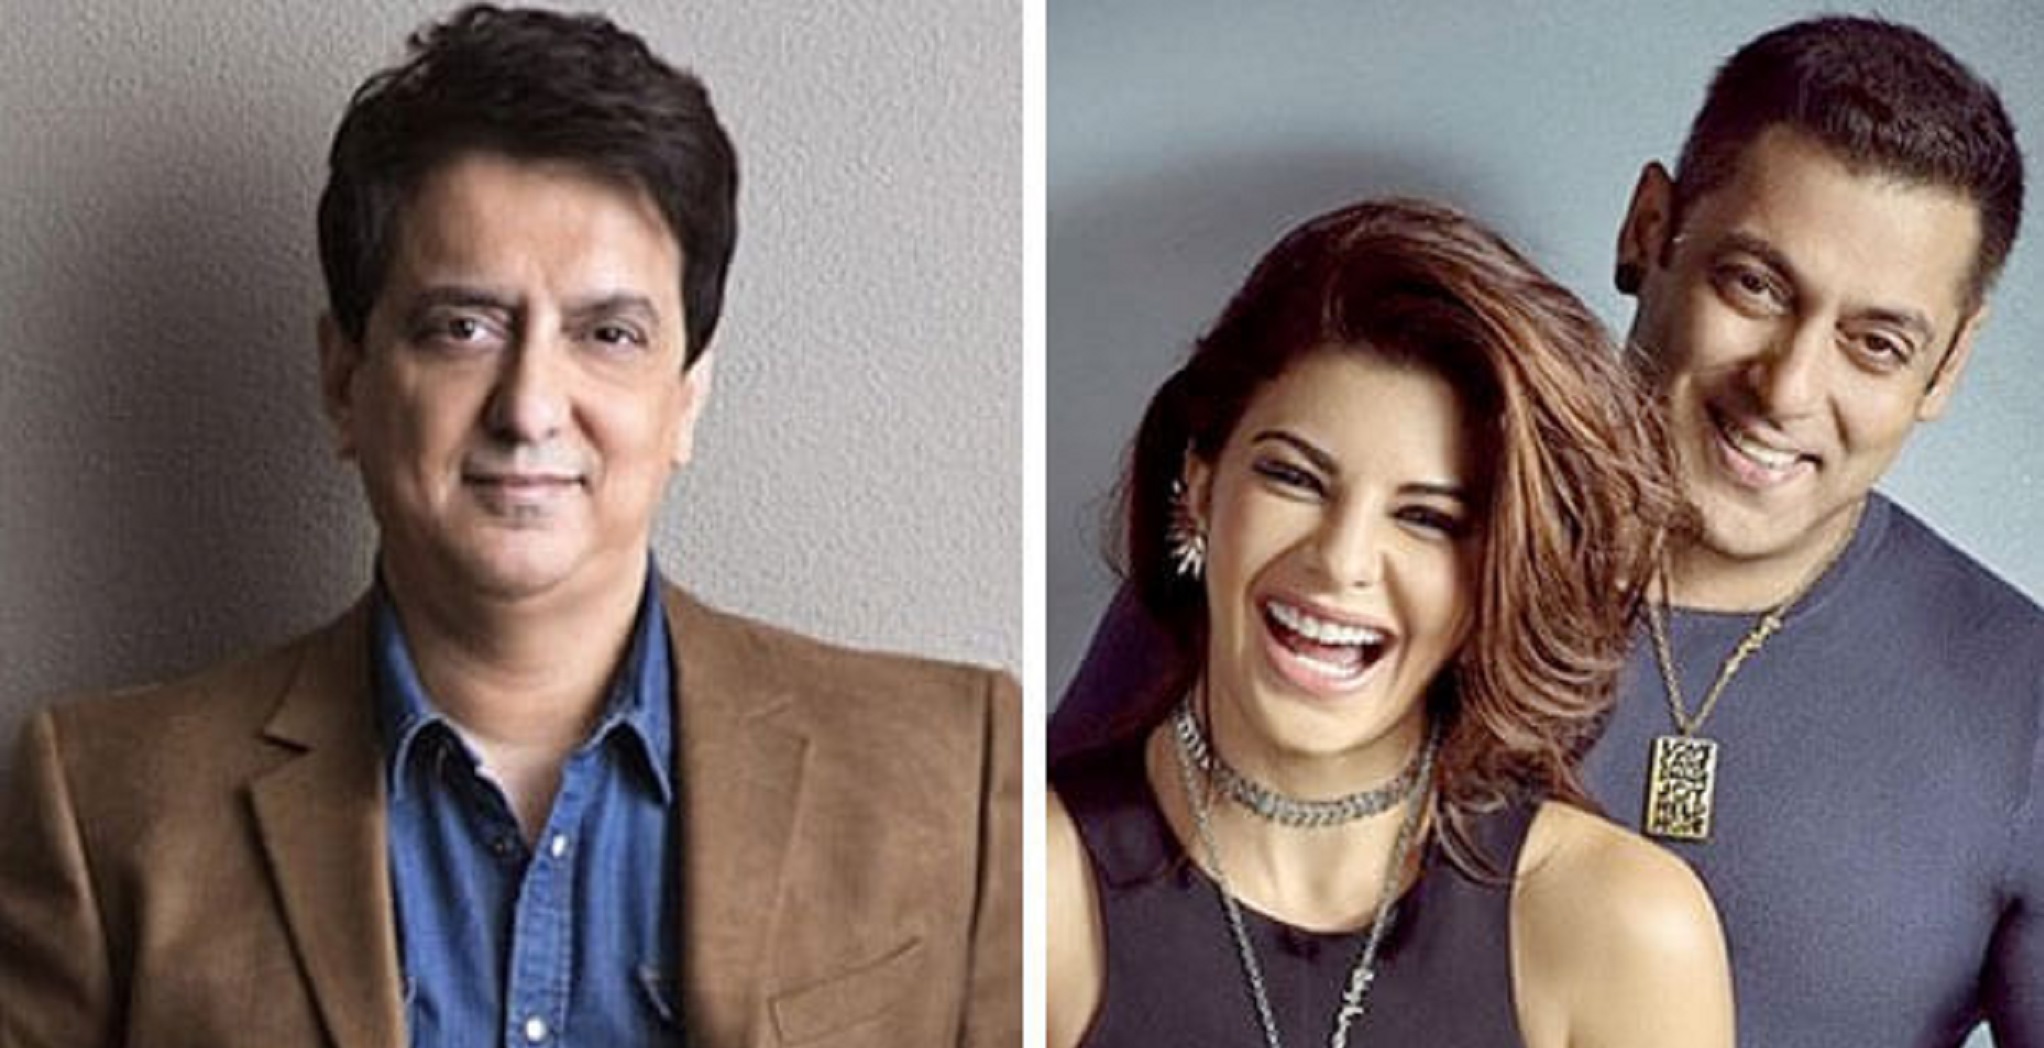 Jacqueline Fernandez Given Kick 2 As a Birthday Gift, will Co-star With Salman Khan in the Sequel